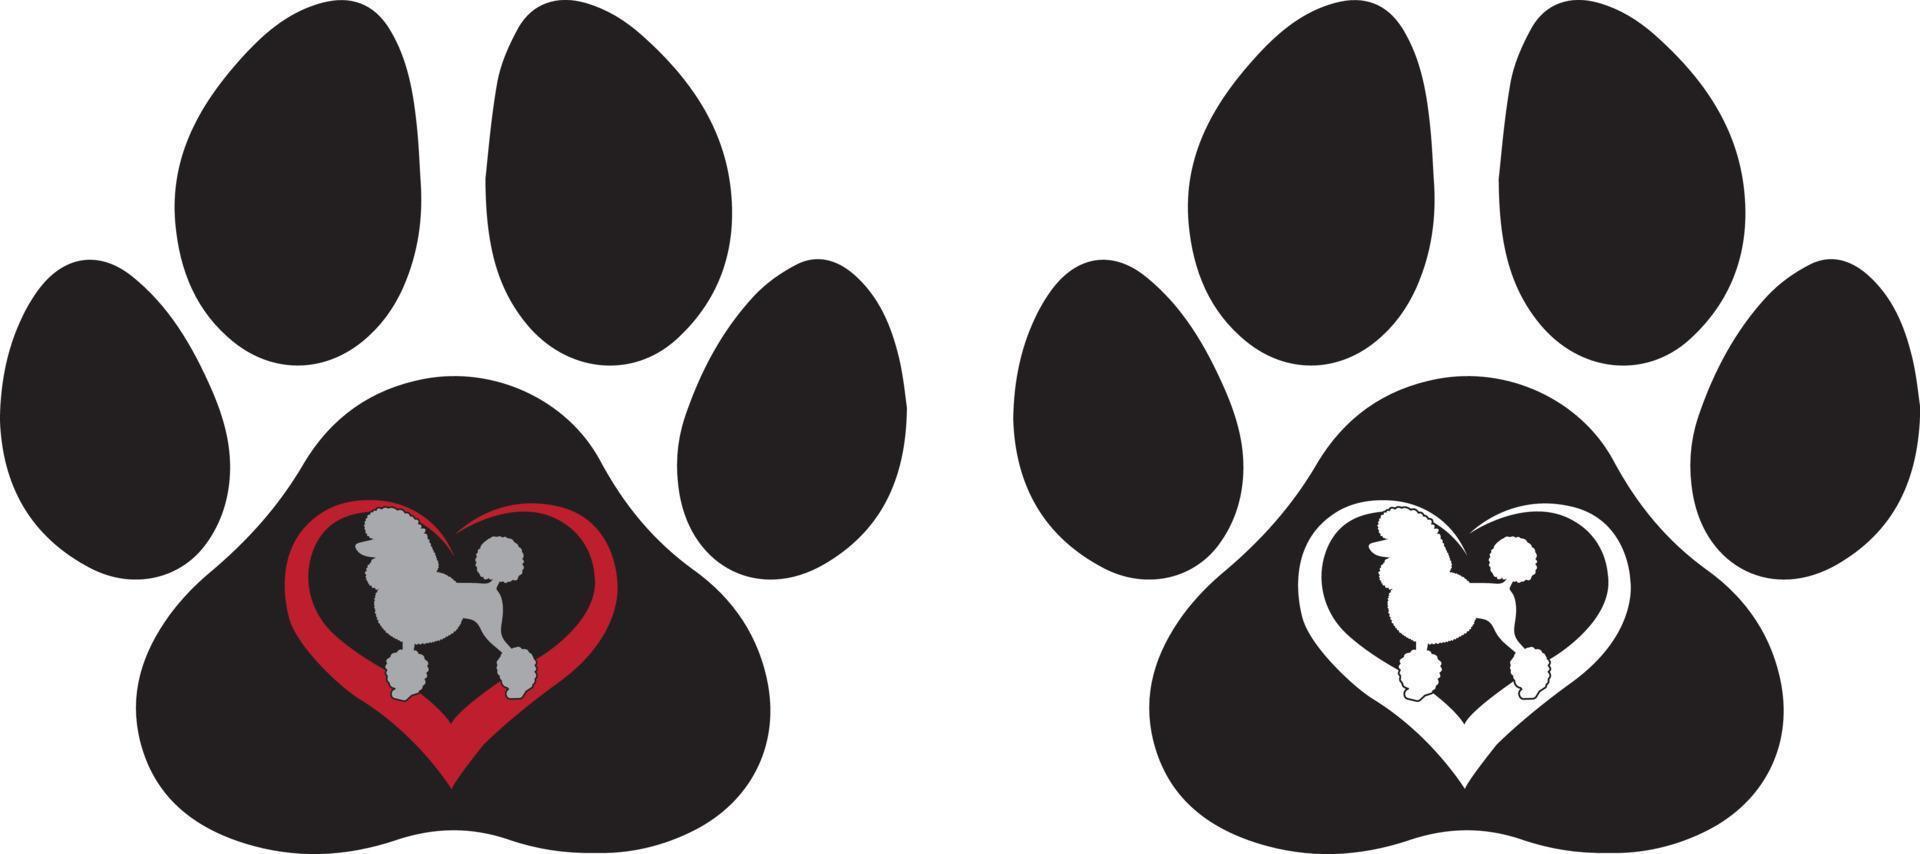 Poodle Paw 1 Dog File vector